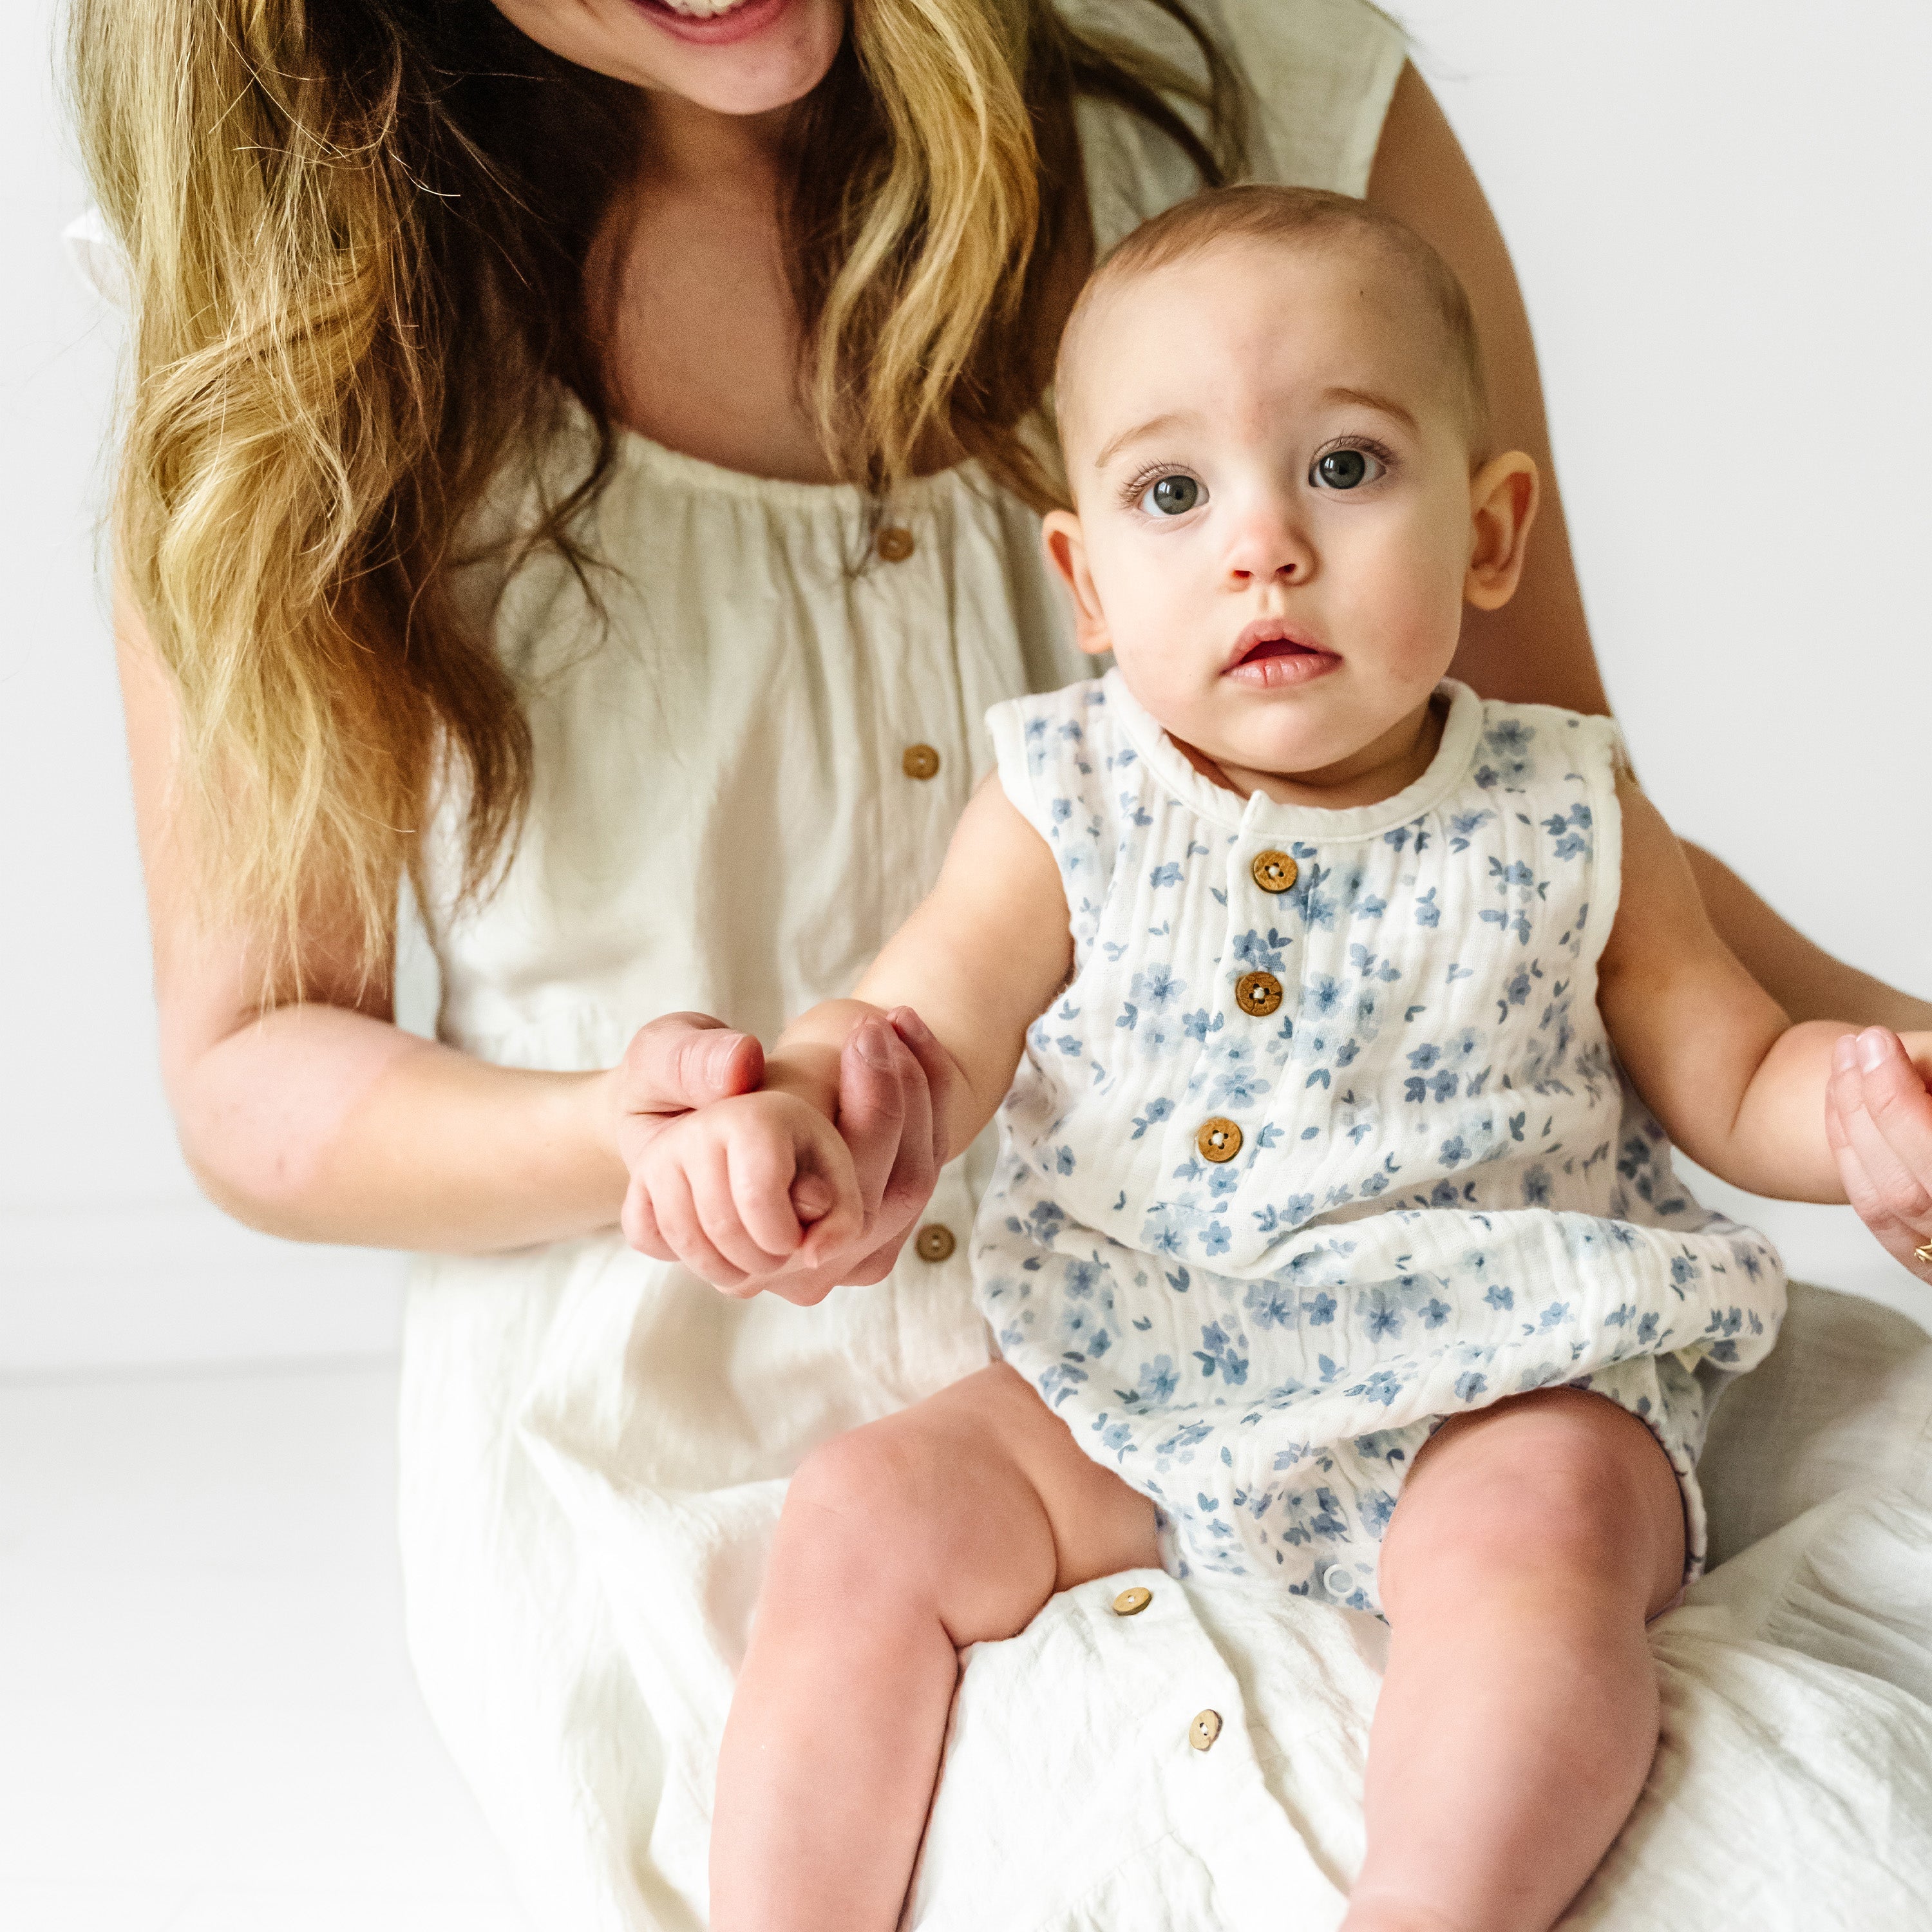 A woman with long, curly blonde hair holding hands with a toddler girl in a floral dress, both sitting against a white background.